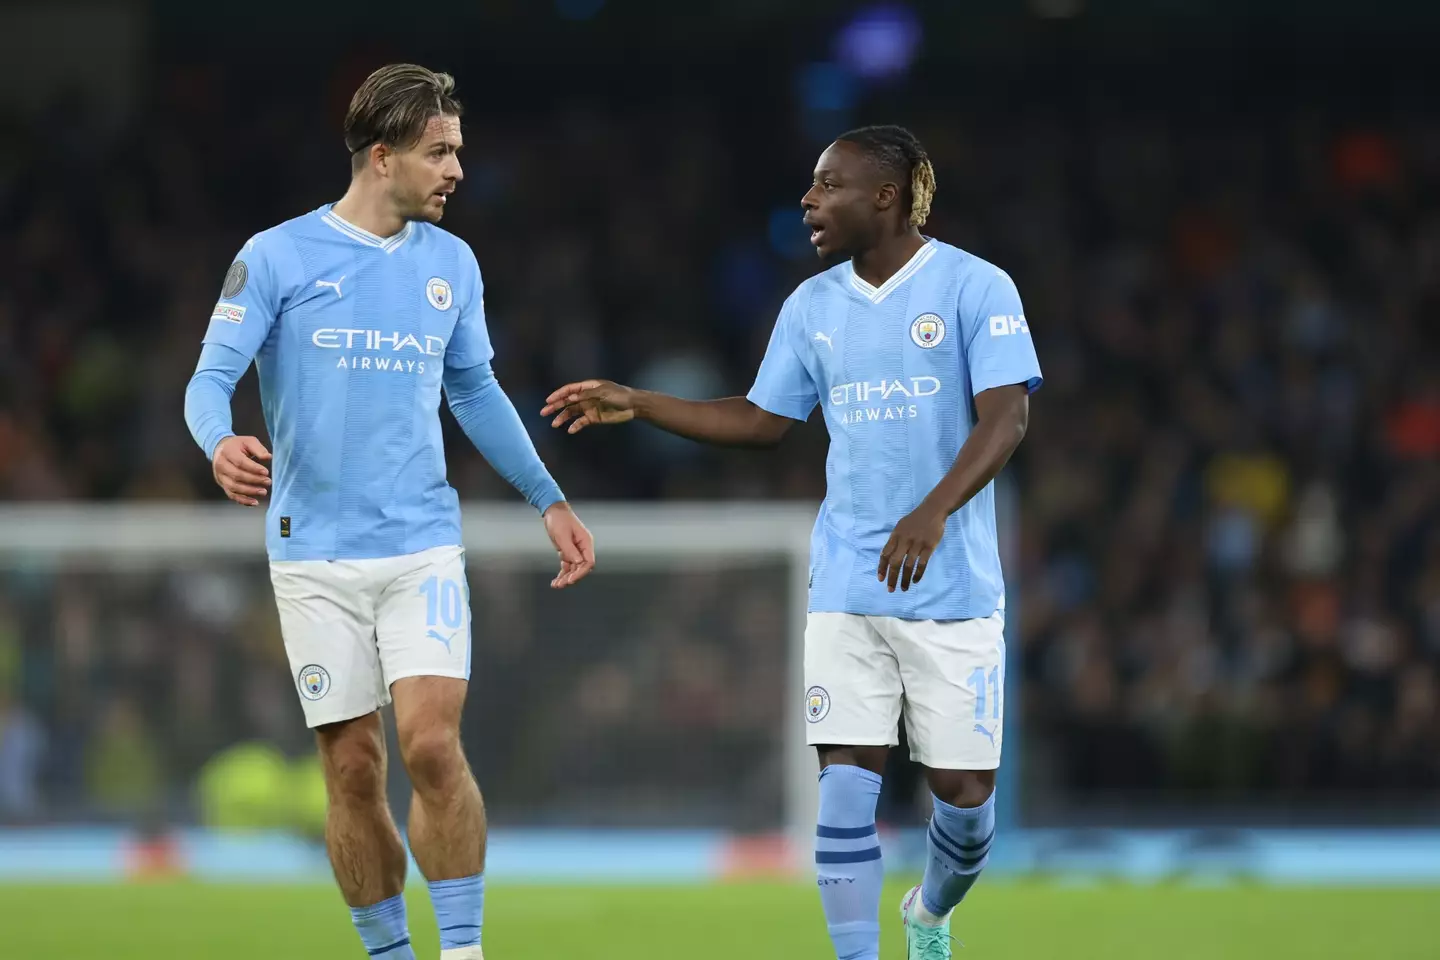 Souness believes Grealish's City career is at a 'crossroads' because of Doku. (Image